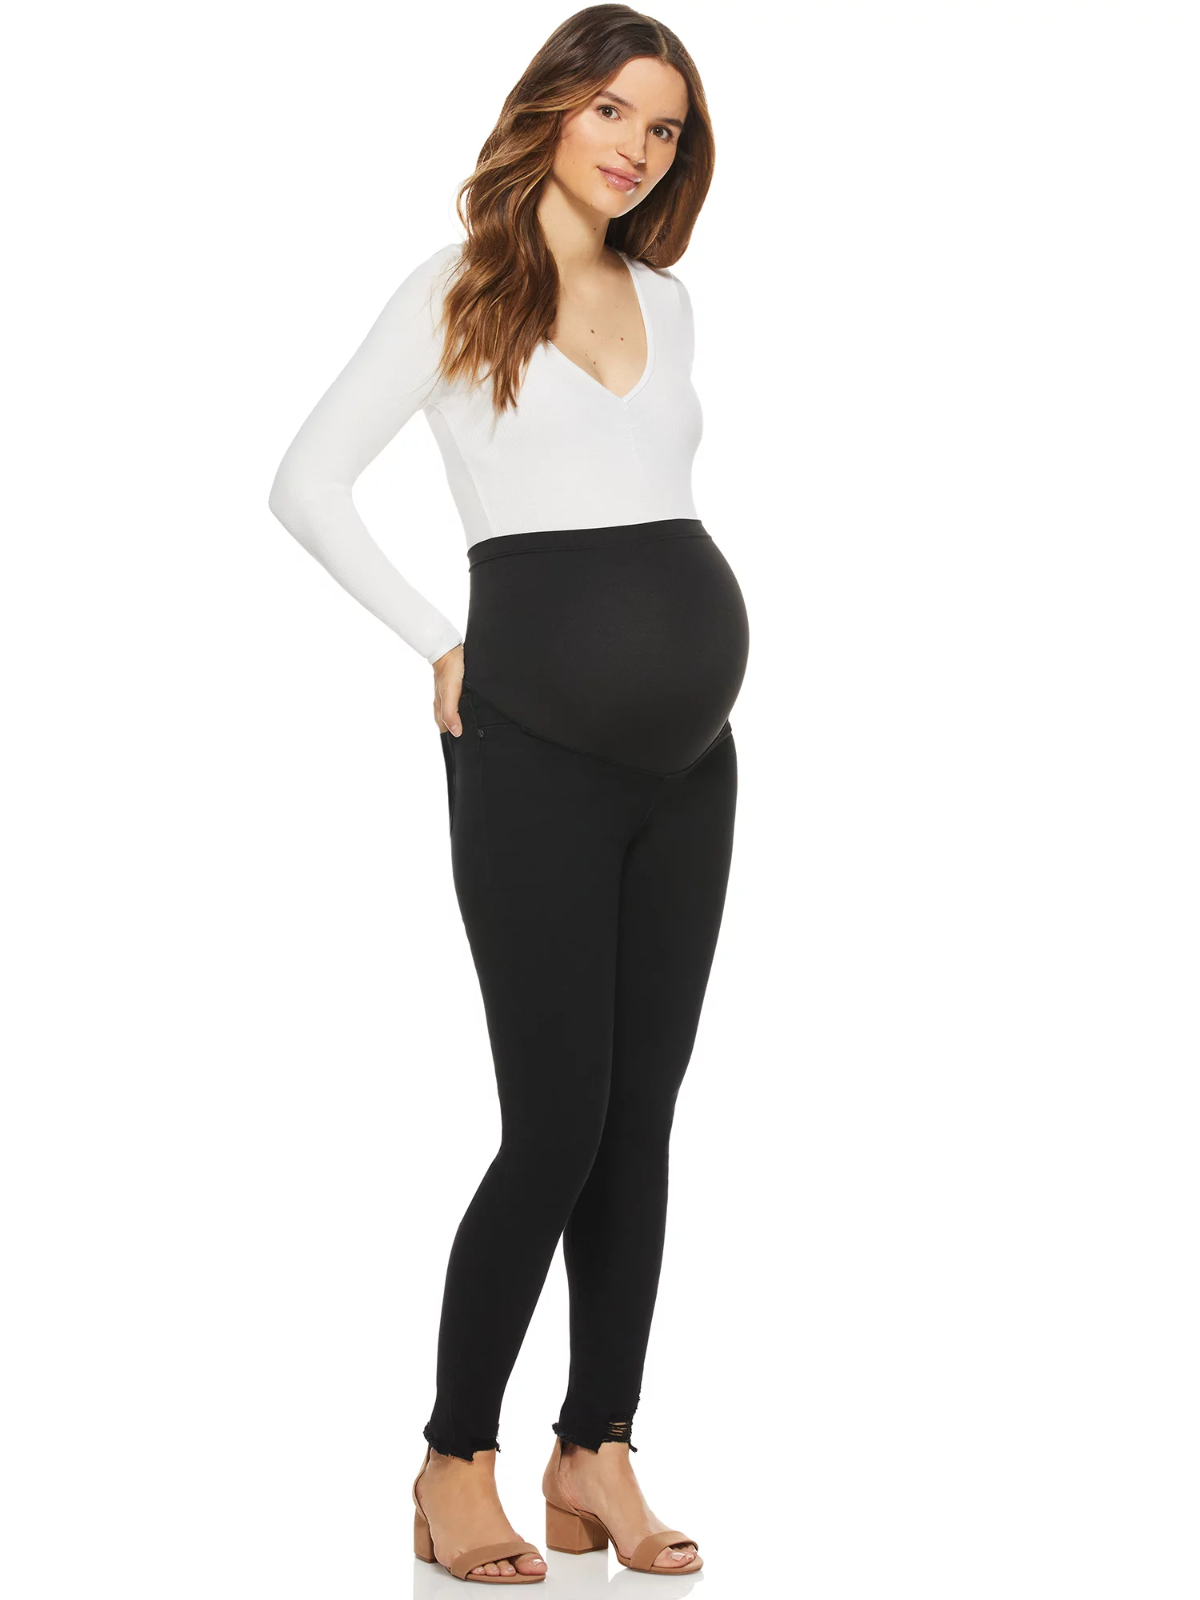 Sofia Jeans by Sofia Vergara Women's Maternity Rosa Curvy Jeans with Full Belly